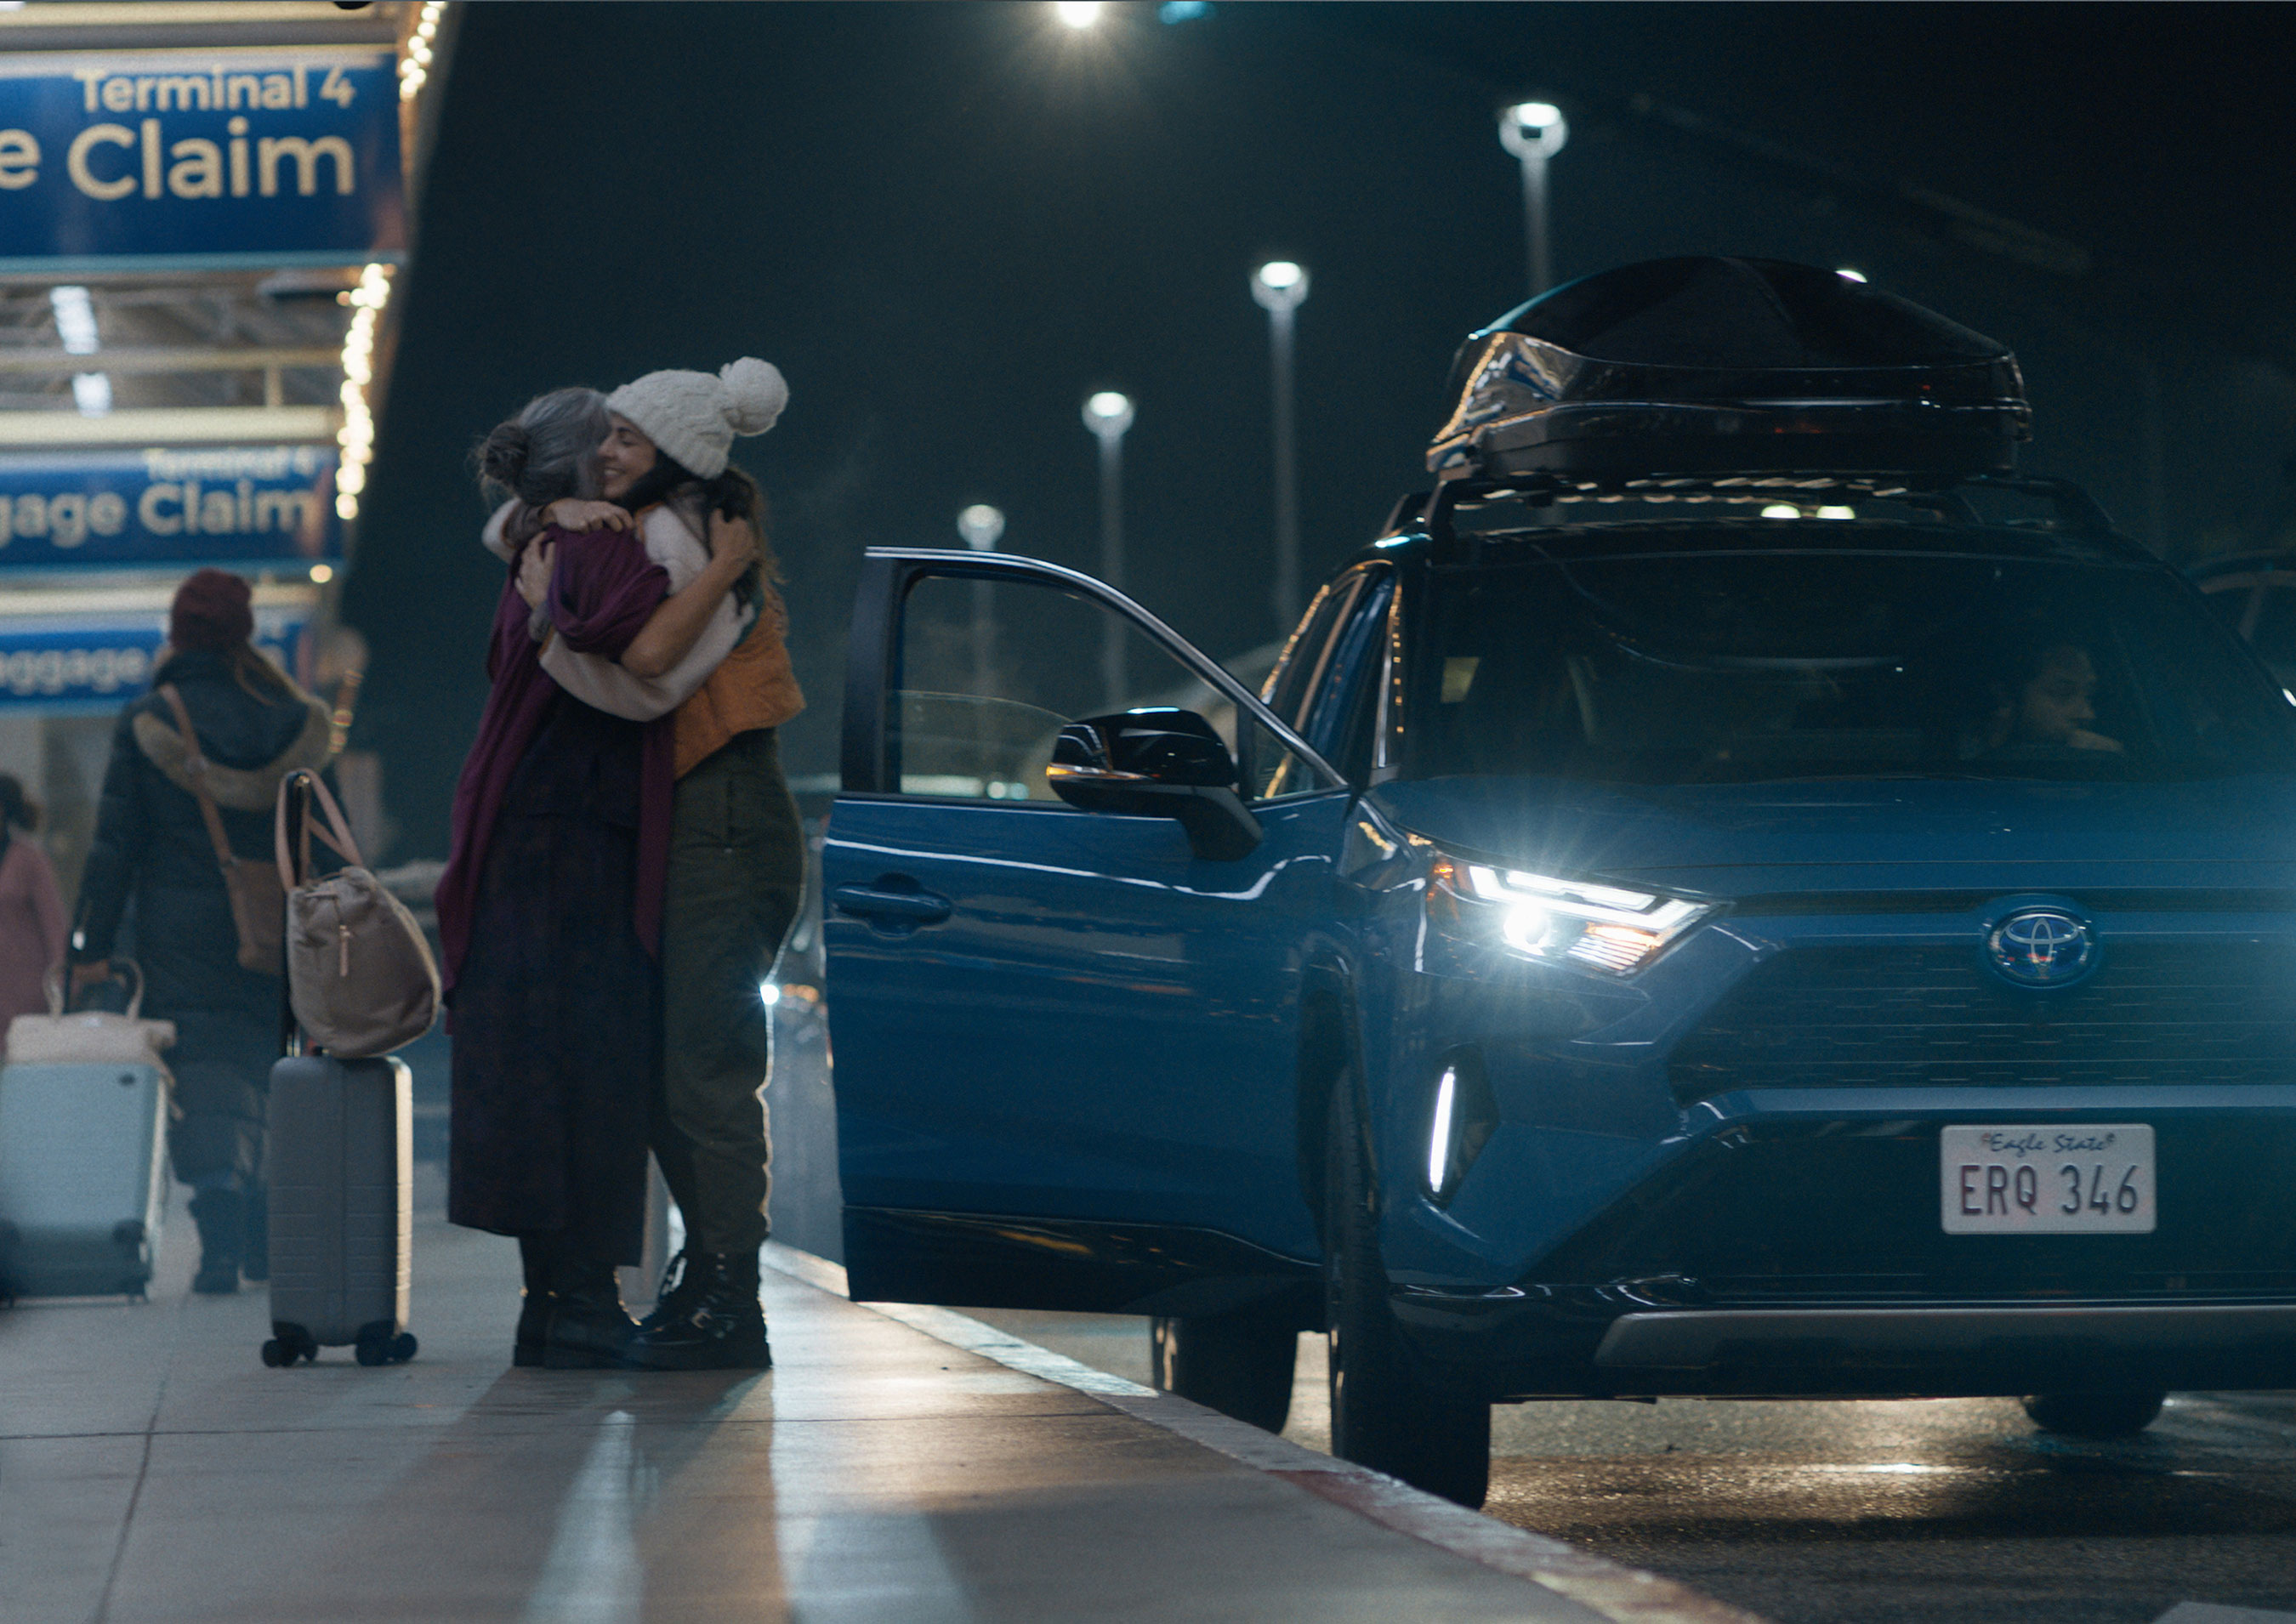 Toyota’s spot “Arrivals,” developed by Conill Advertising, shares a comforting message of families reuniting